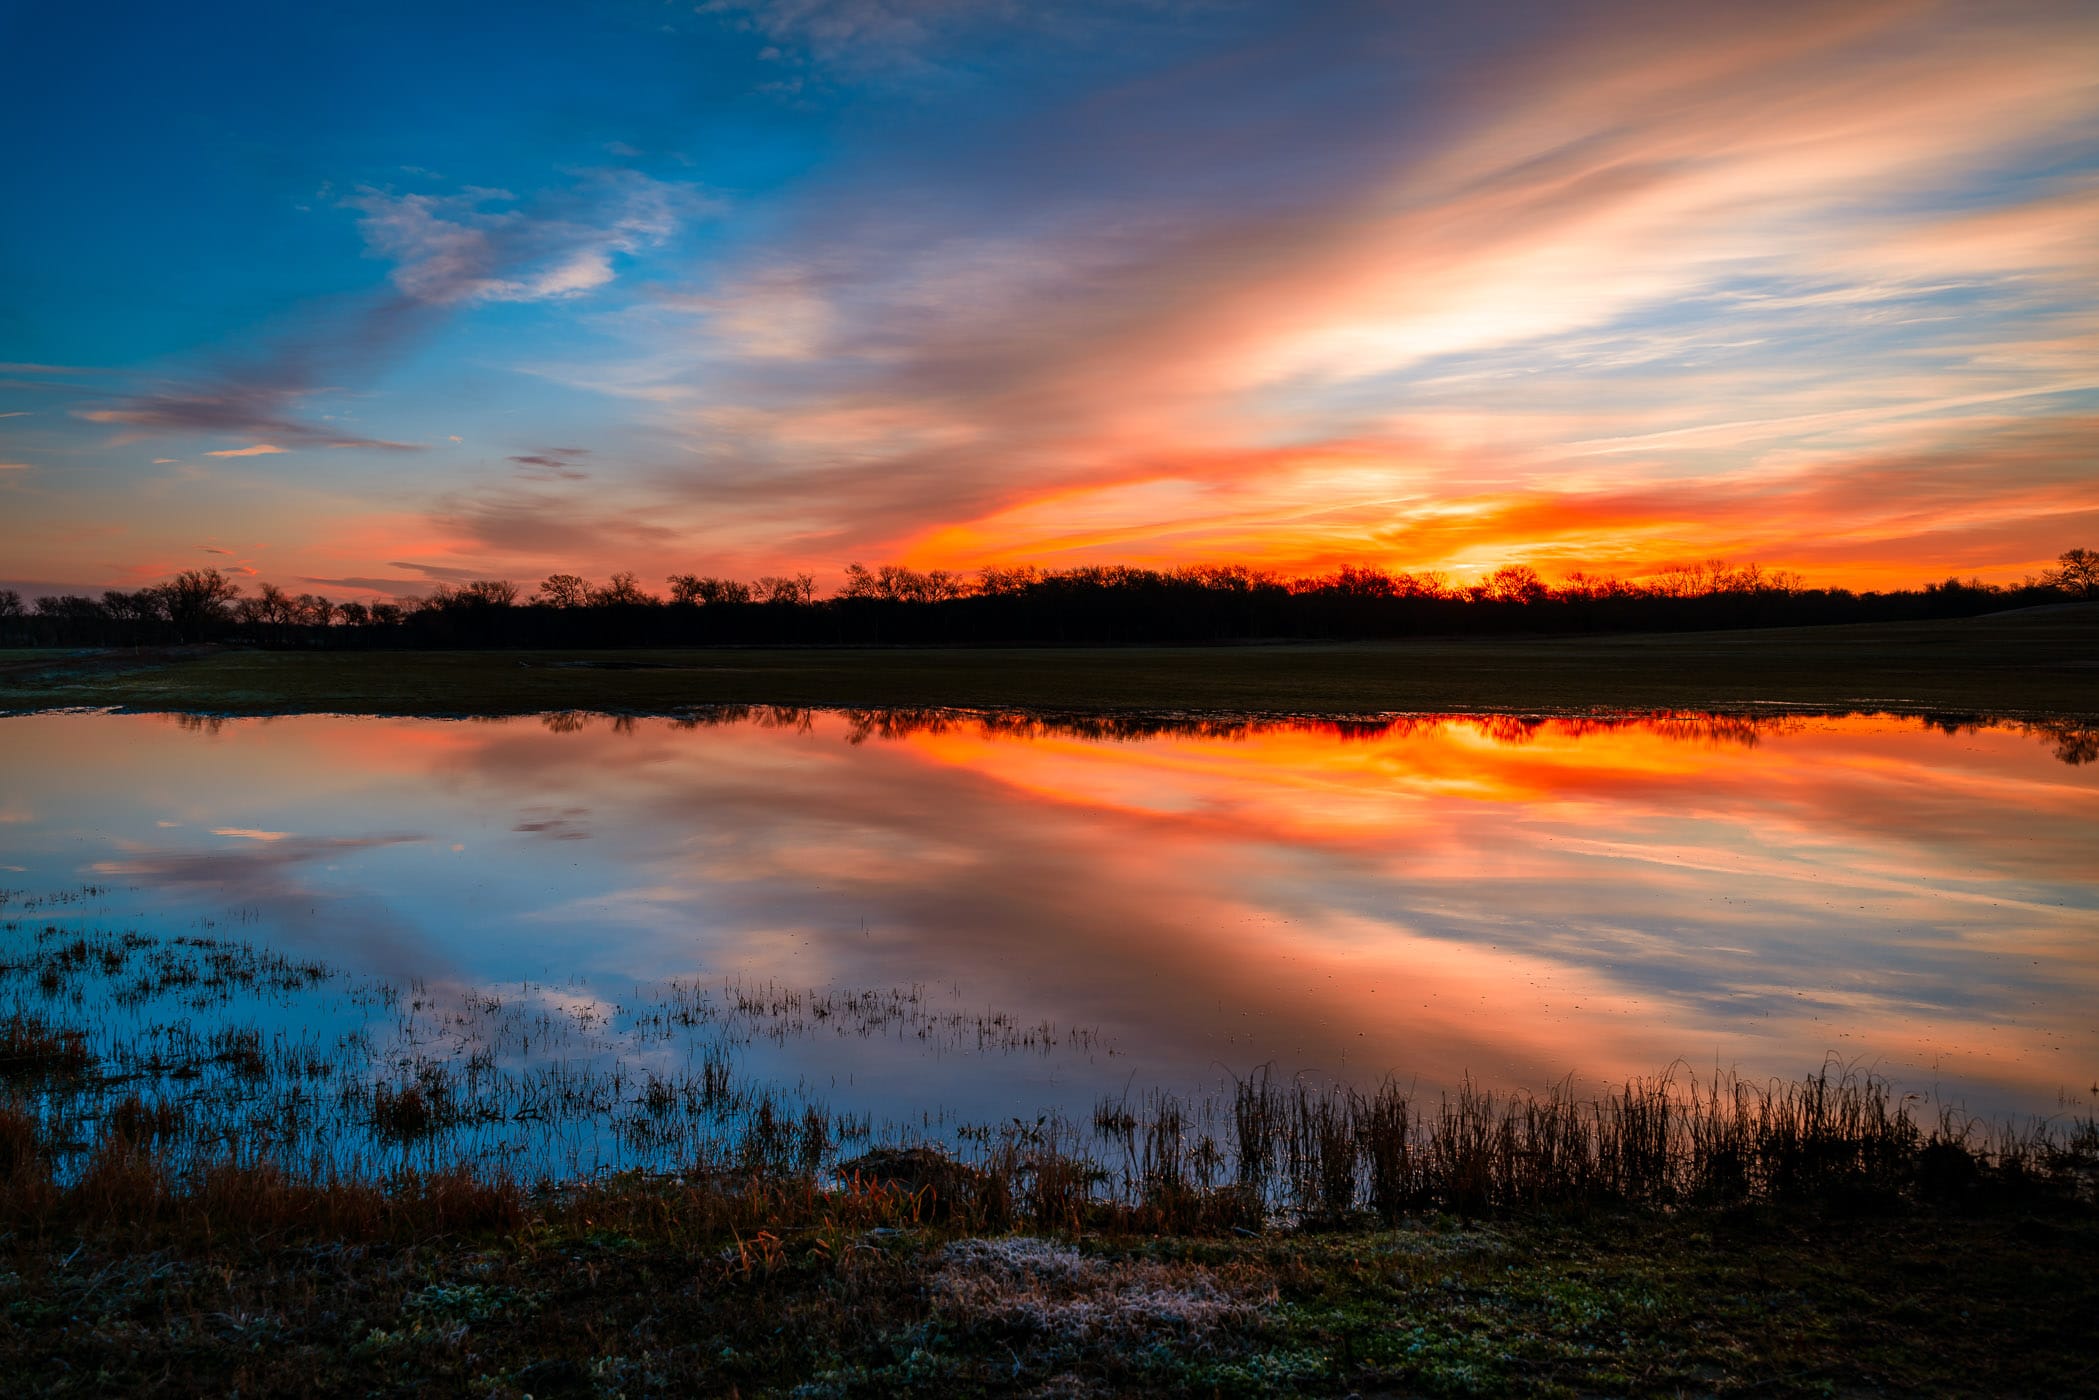 The sun rises on a pond at Texas' Hagerman National Wildlife Refuge.